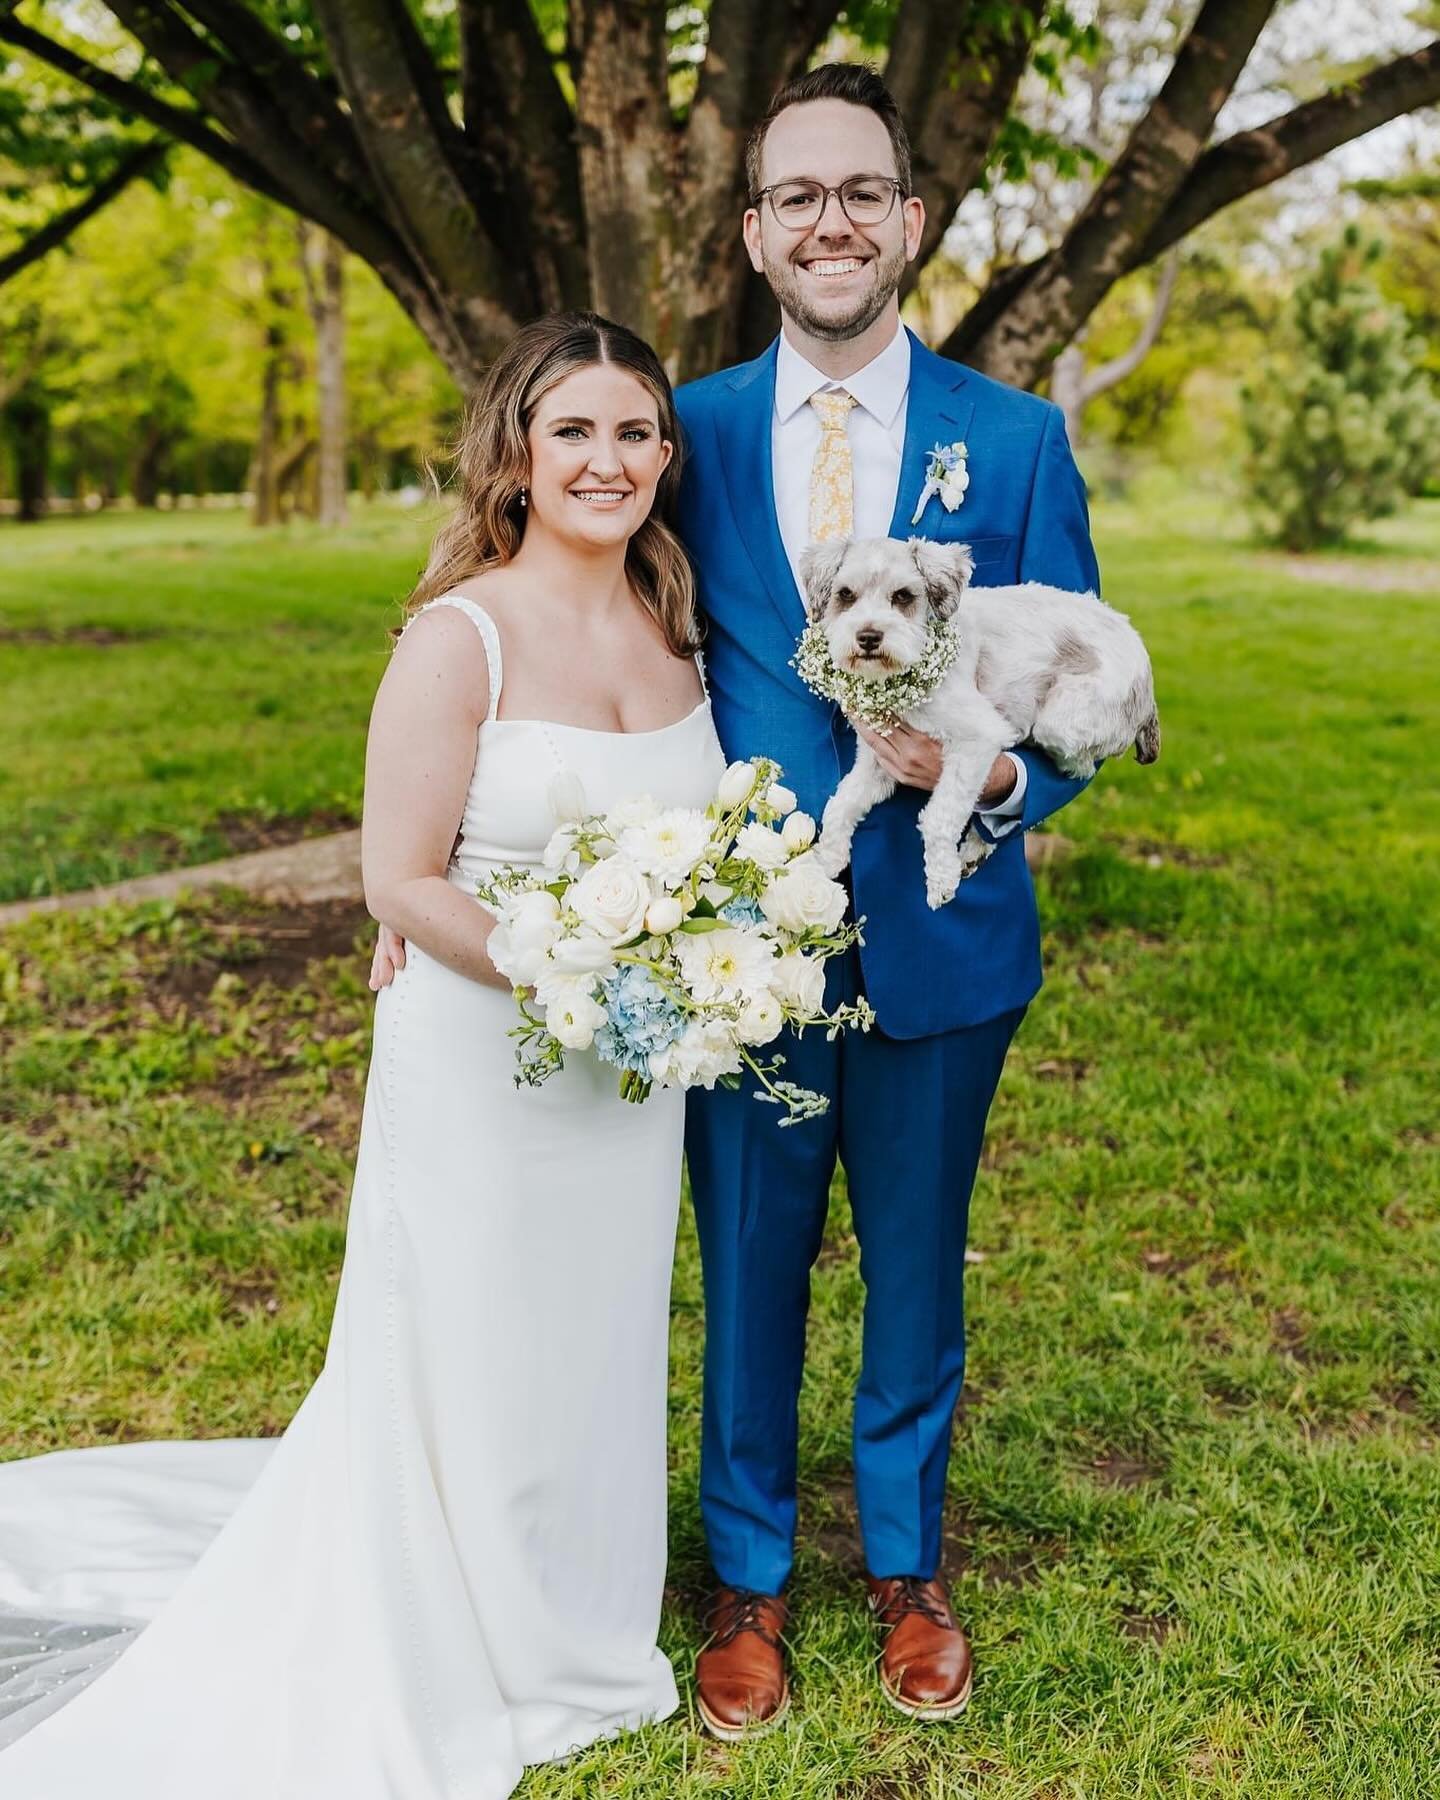 Capturing Delaney &amp; Ryan&rsquo;s elegant and timeless wedding at The Pella in Omaha was an absolute joy! Surrounded by their closest friends and family, and their adorable dog, this day was nothing short of magical. Cheers to a lifetime of love a